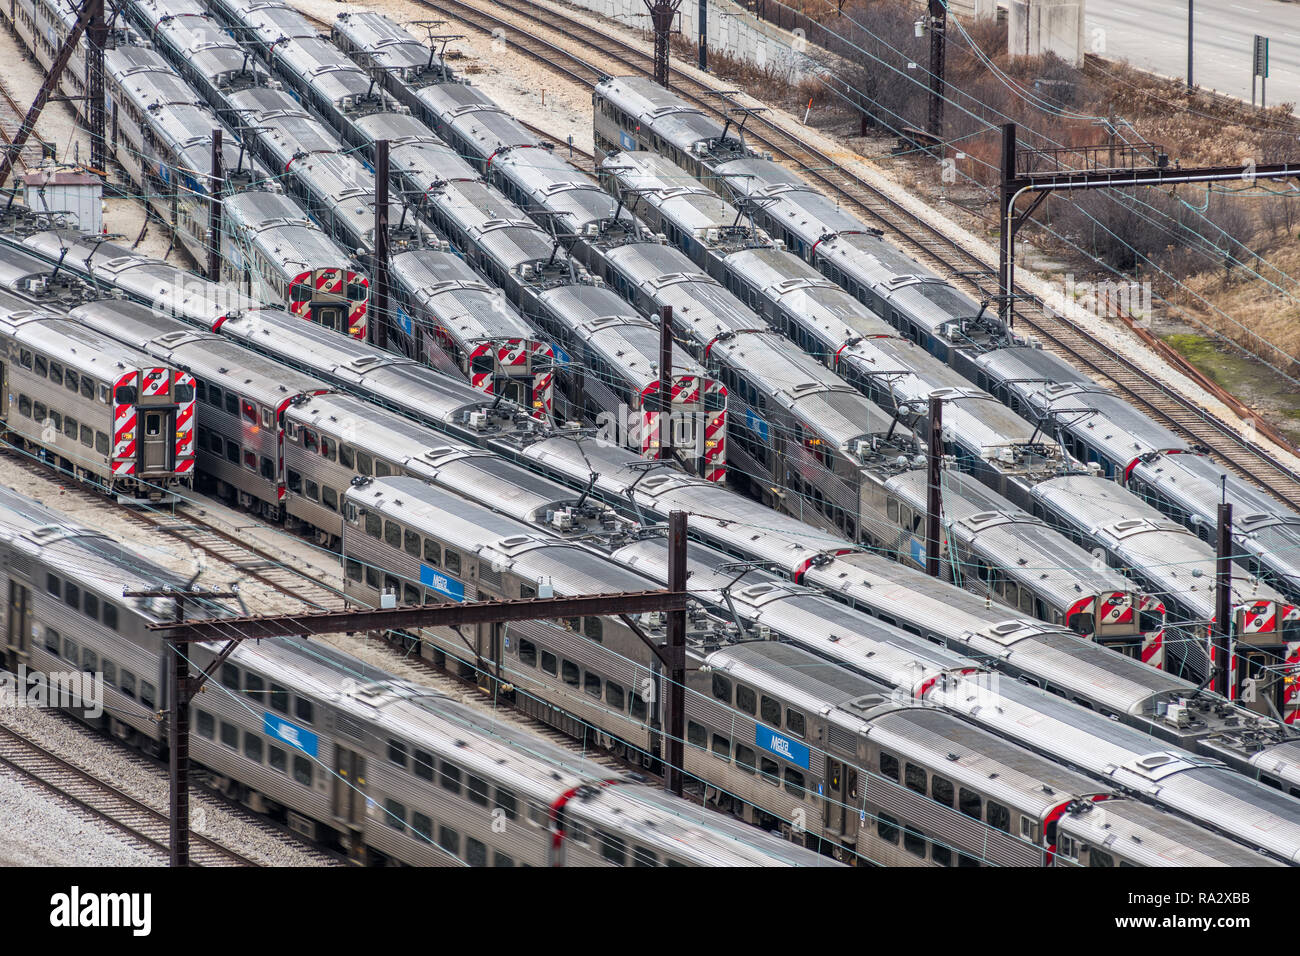 Aerial view of Metra Trains in railyard Stock Photo